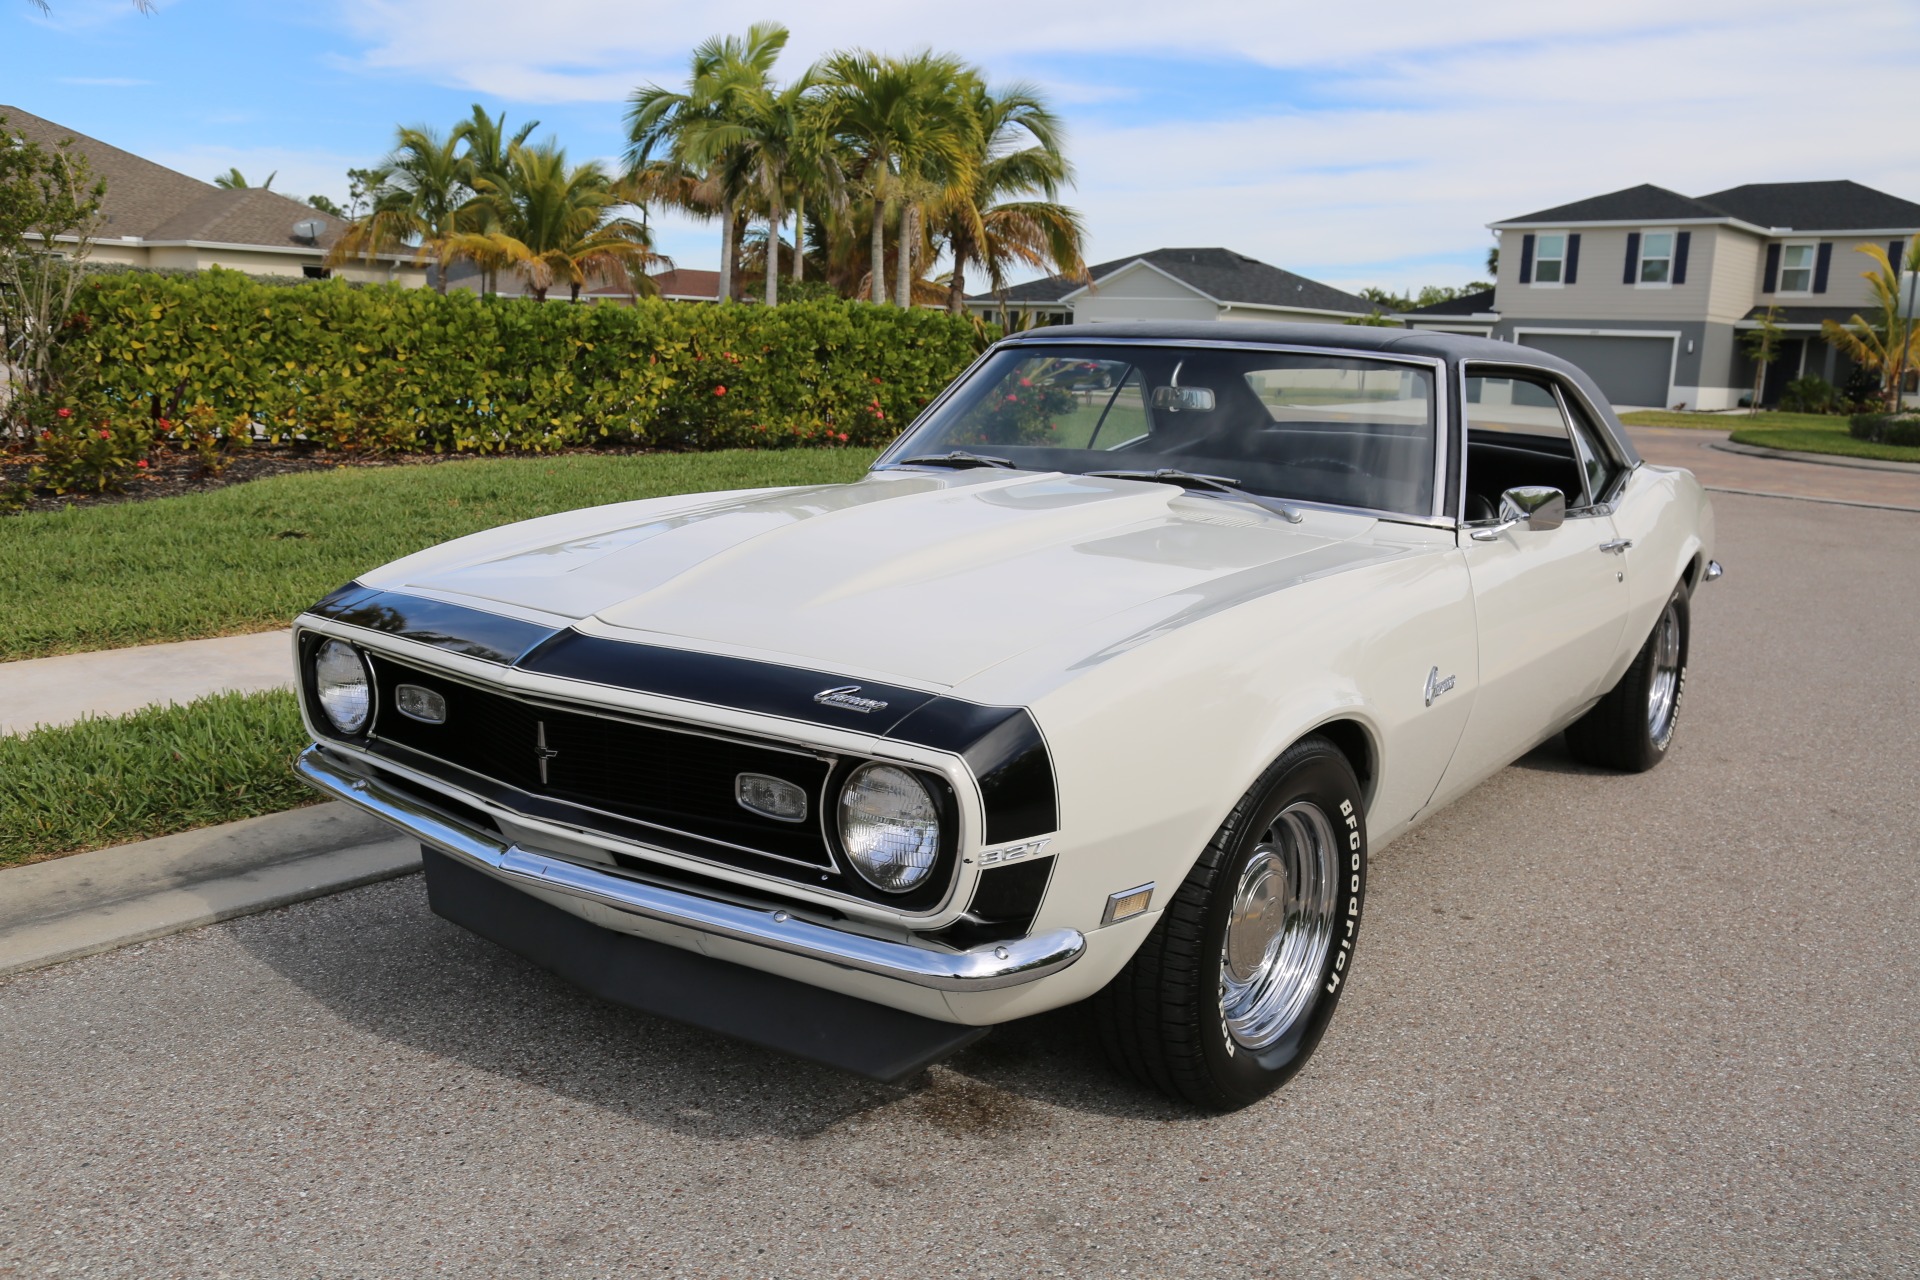 Used 1968 Chevy Camaro 327 V8 Auto # Match for sale Sold at Muscle Cars for Sale Inc. in Fort Myers FL 33912 3